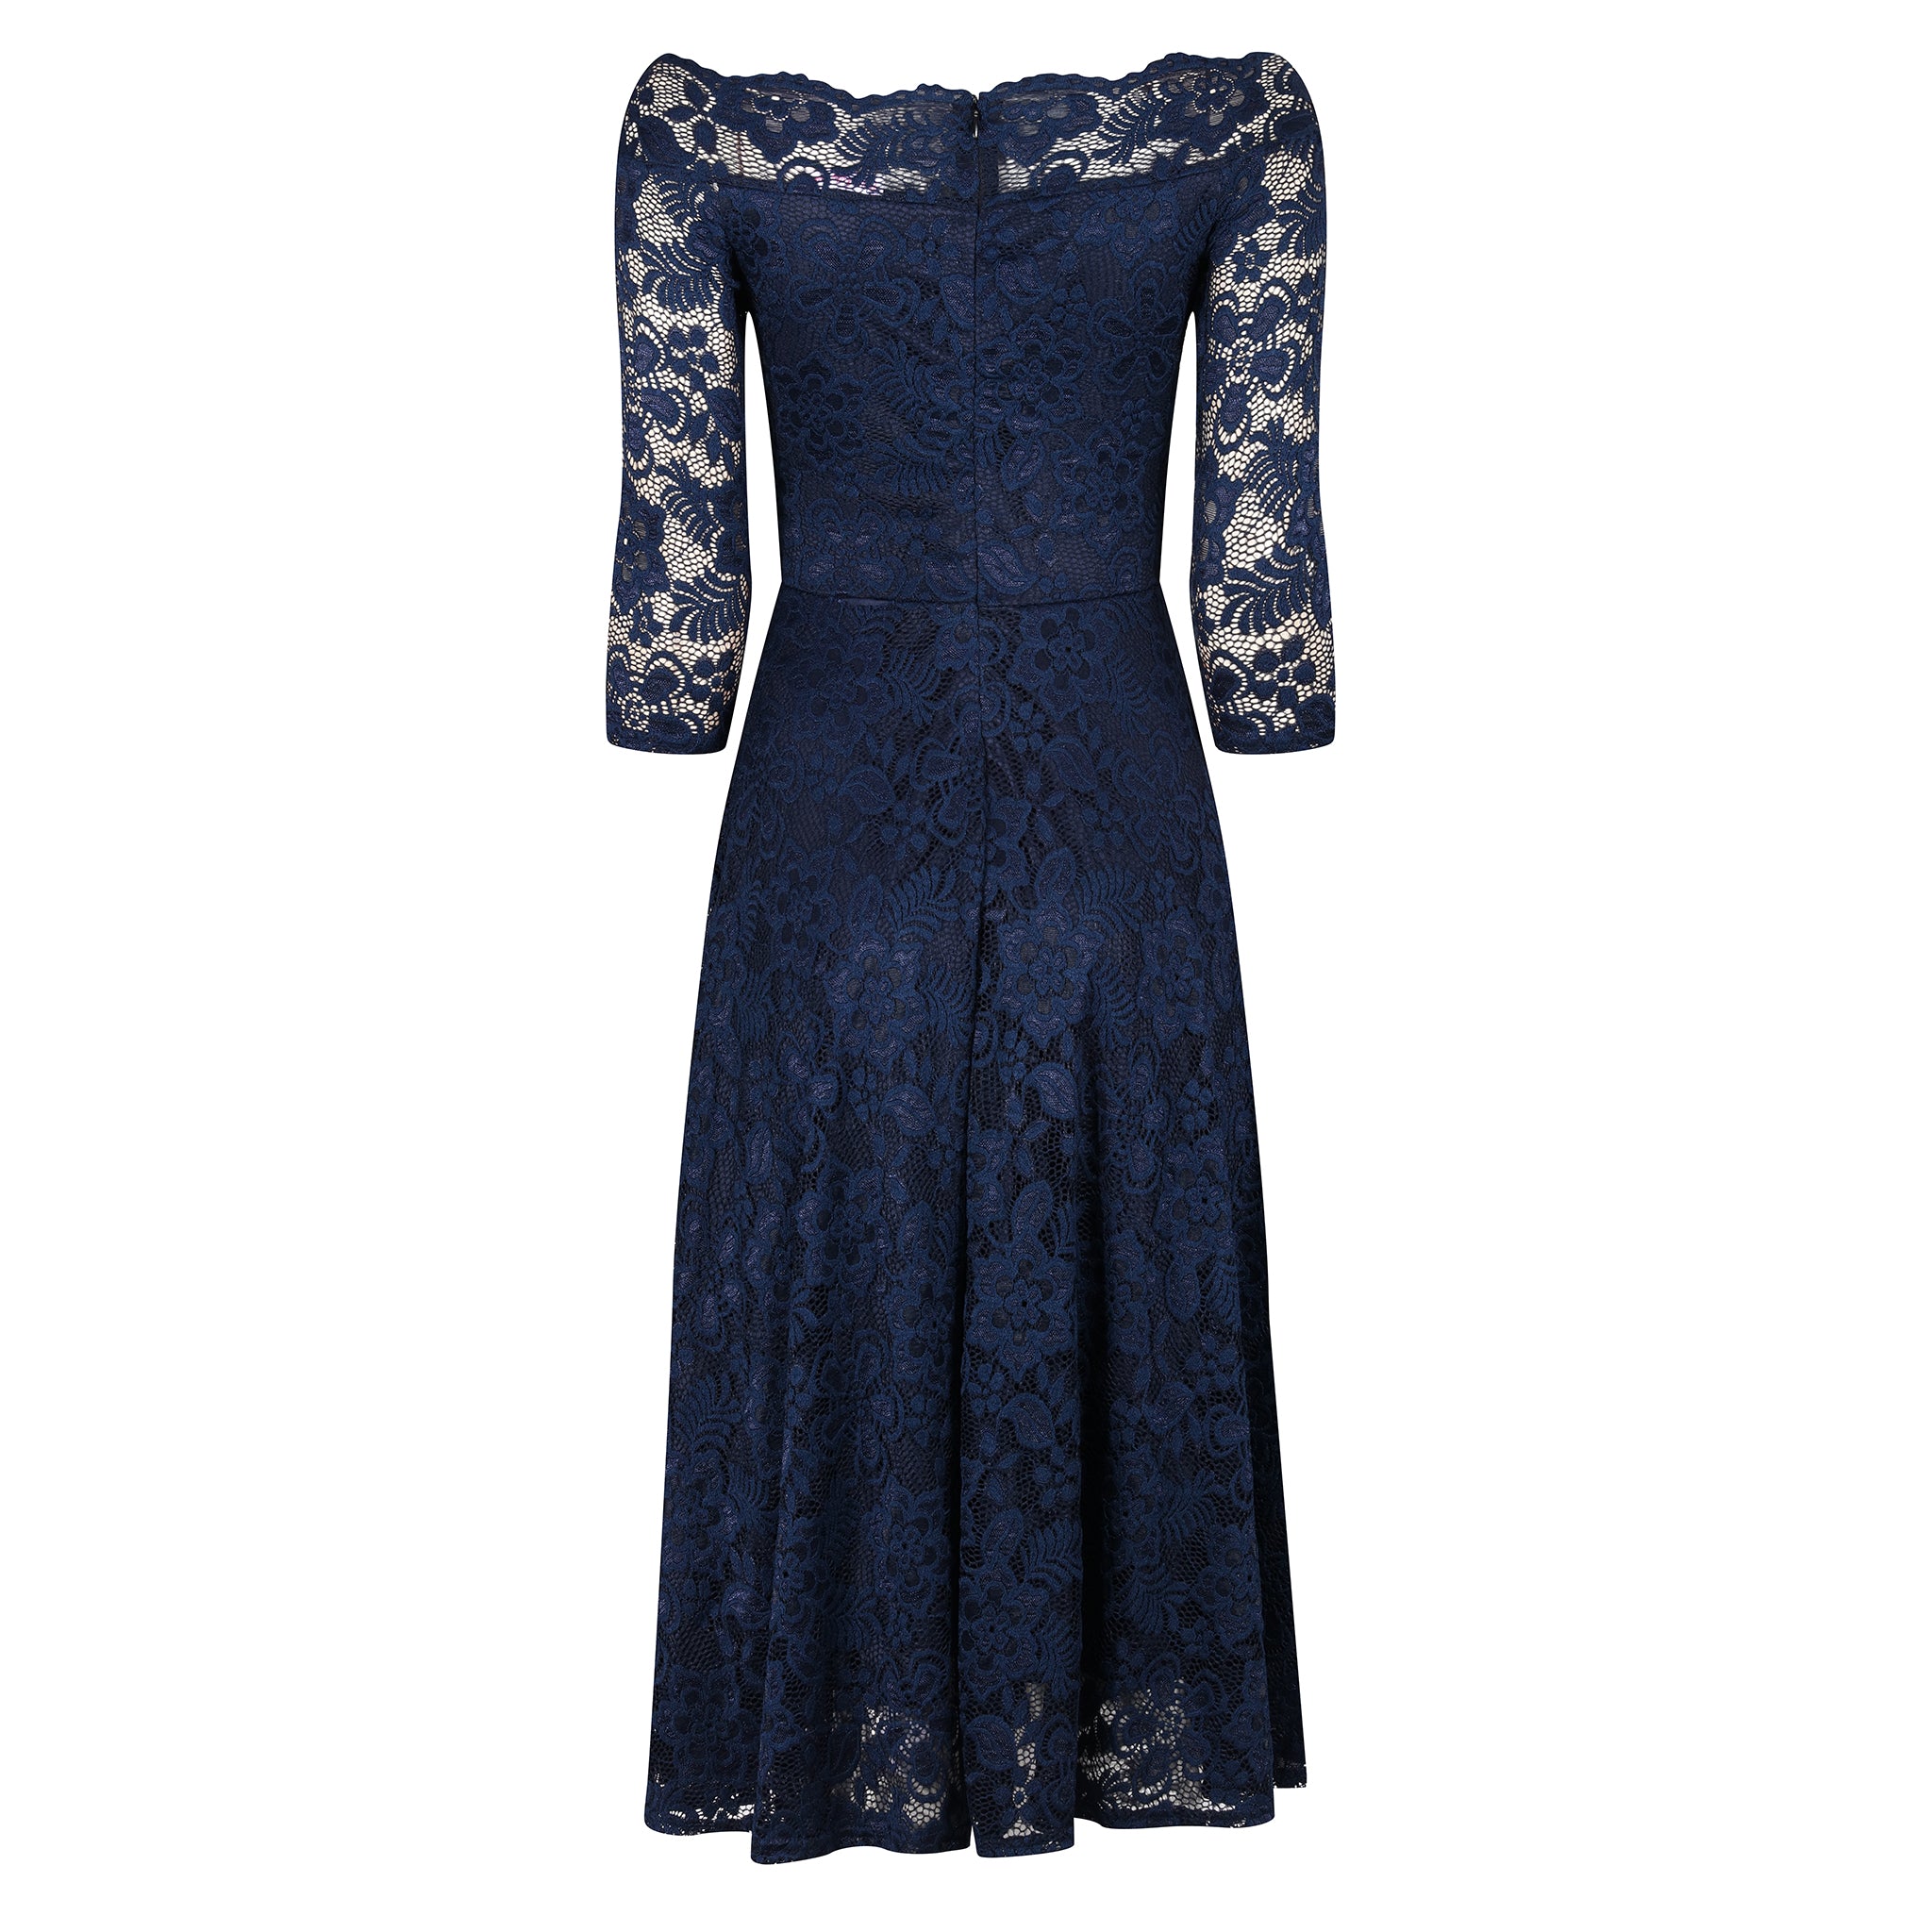 Navy Blue Lace Vintage Style Swing Dress With 3/4 Sleeves & Boat Neck